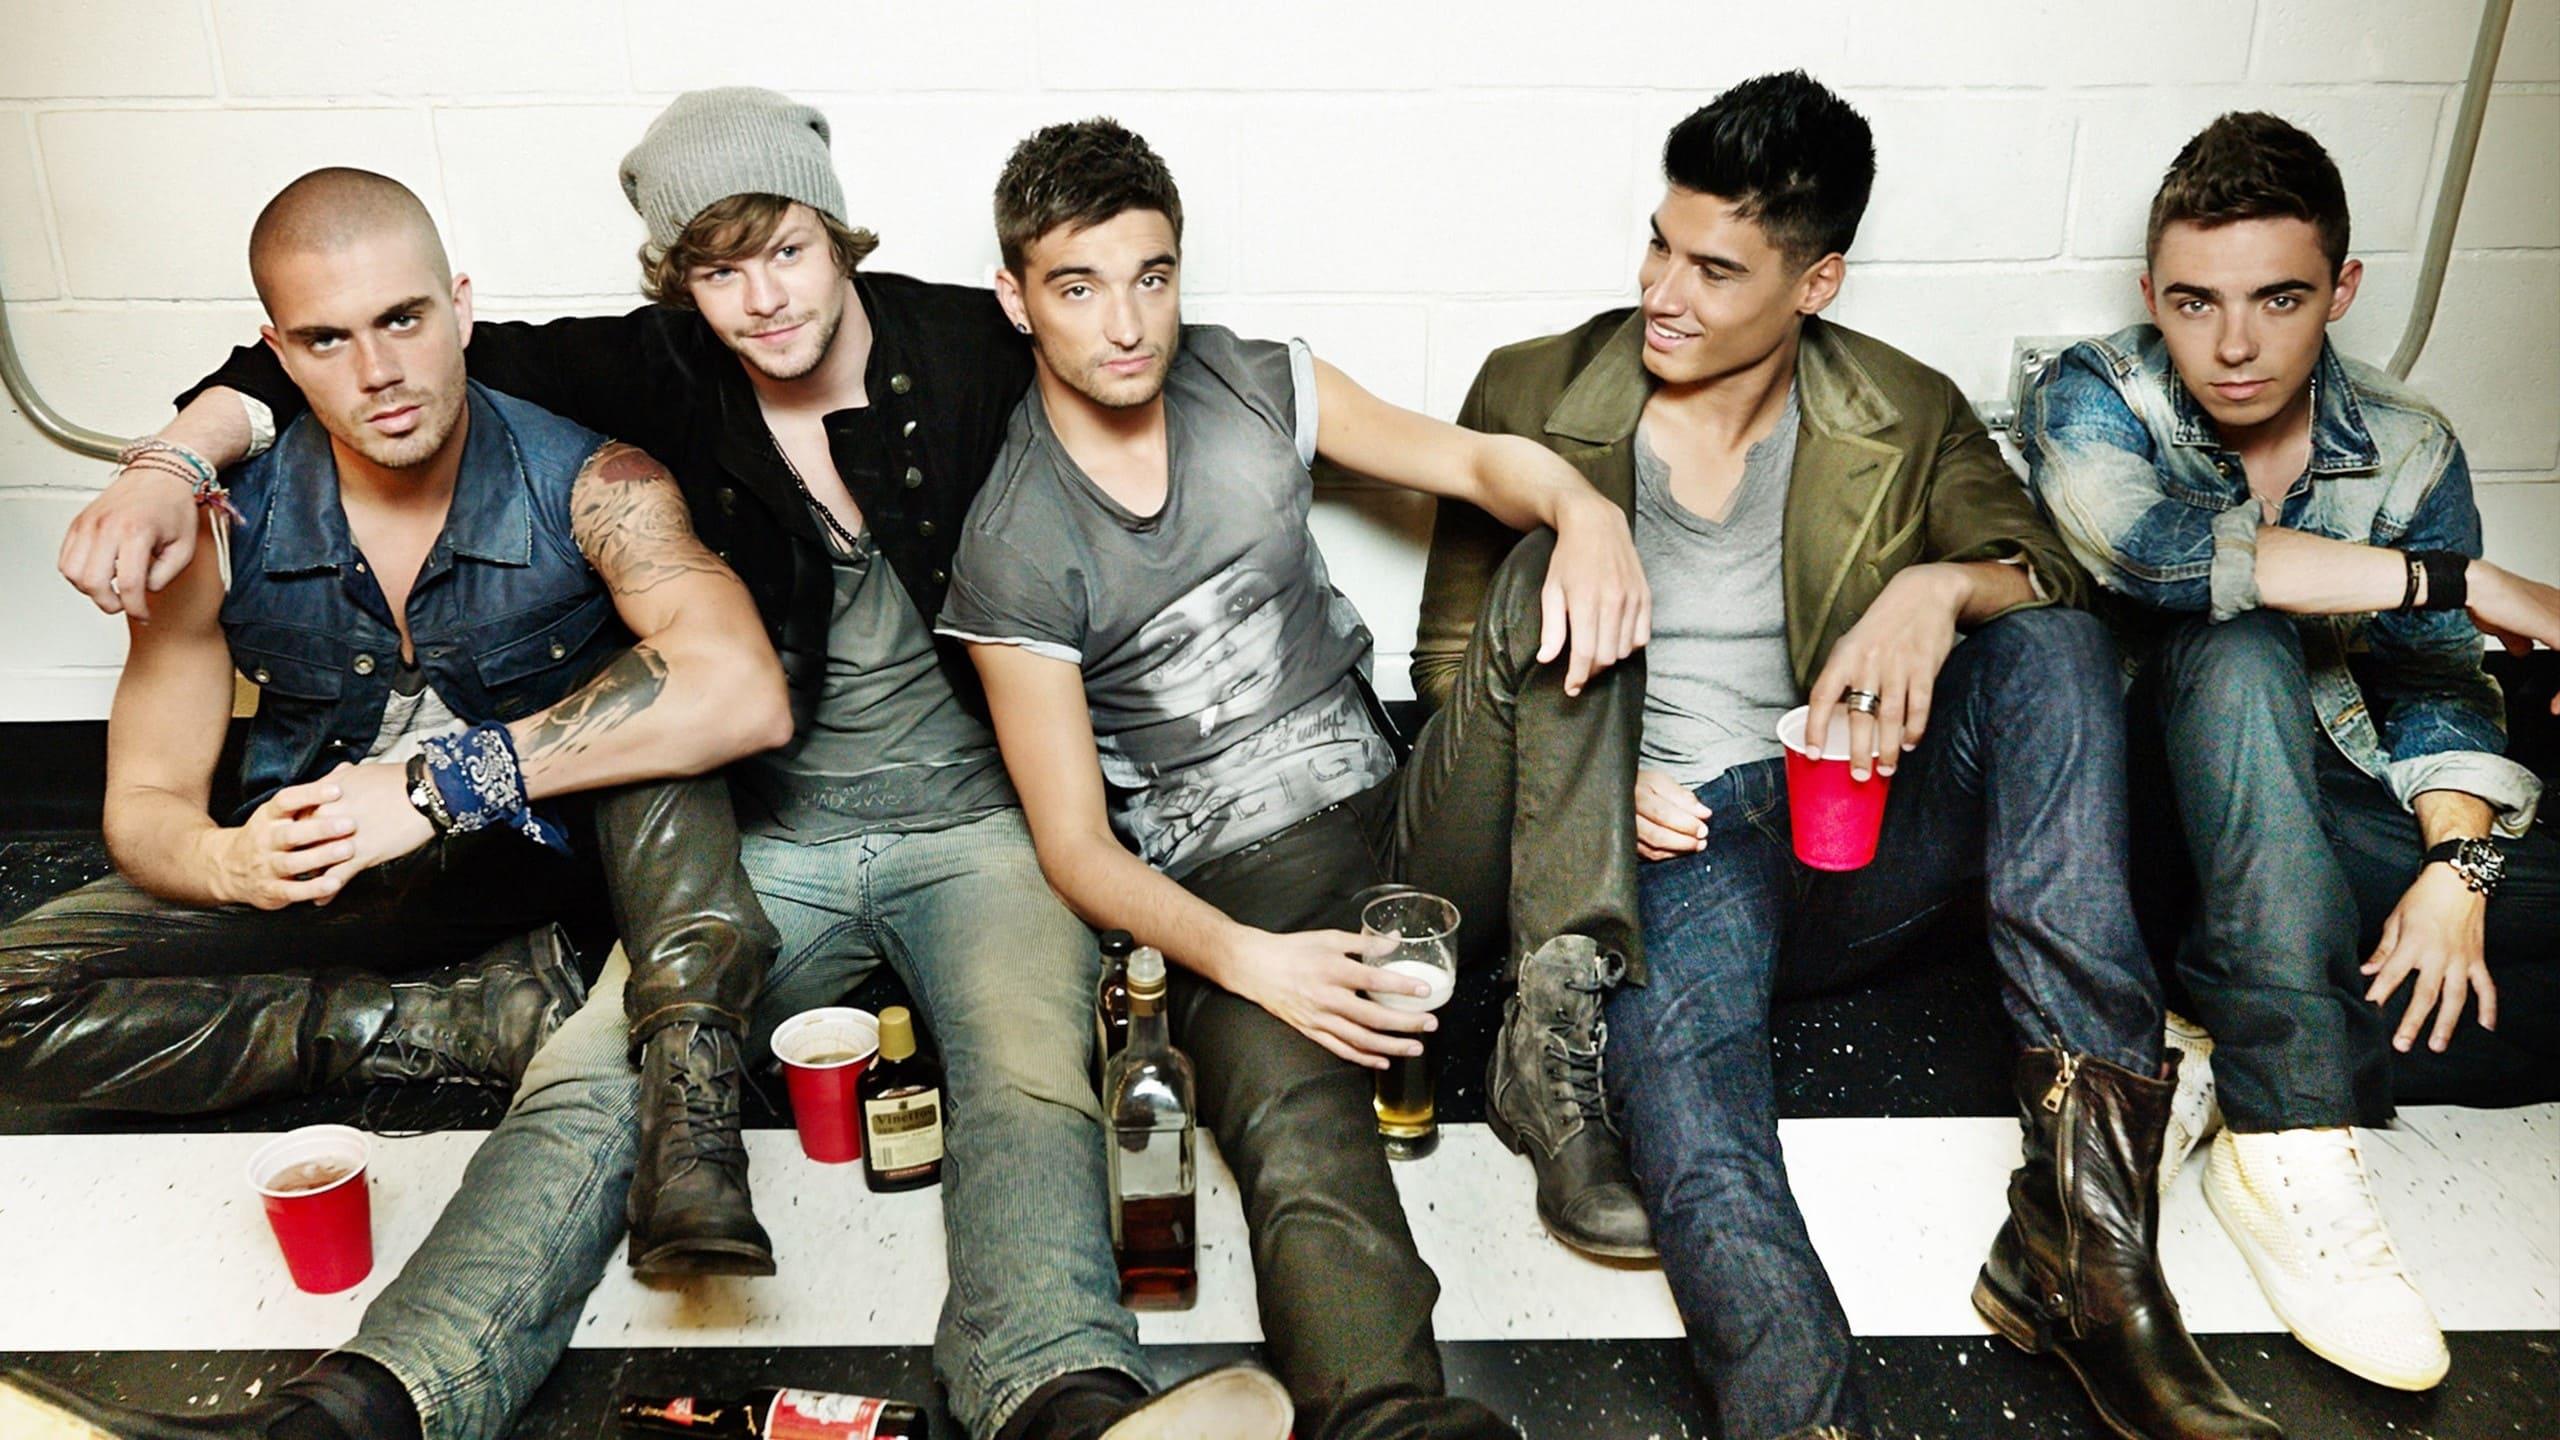 The Wanted Life backdrop